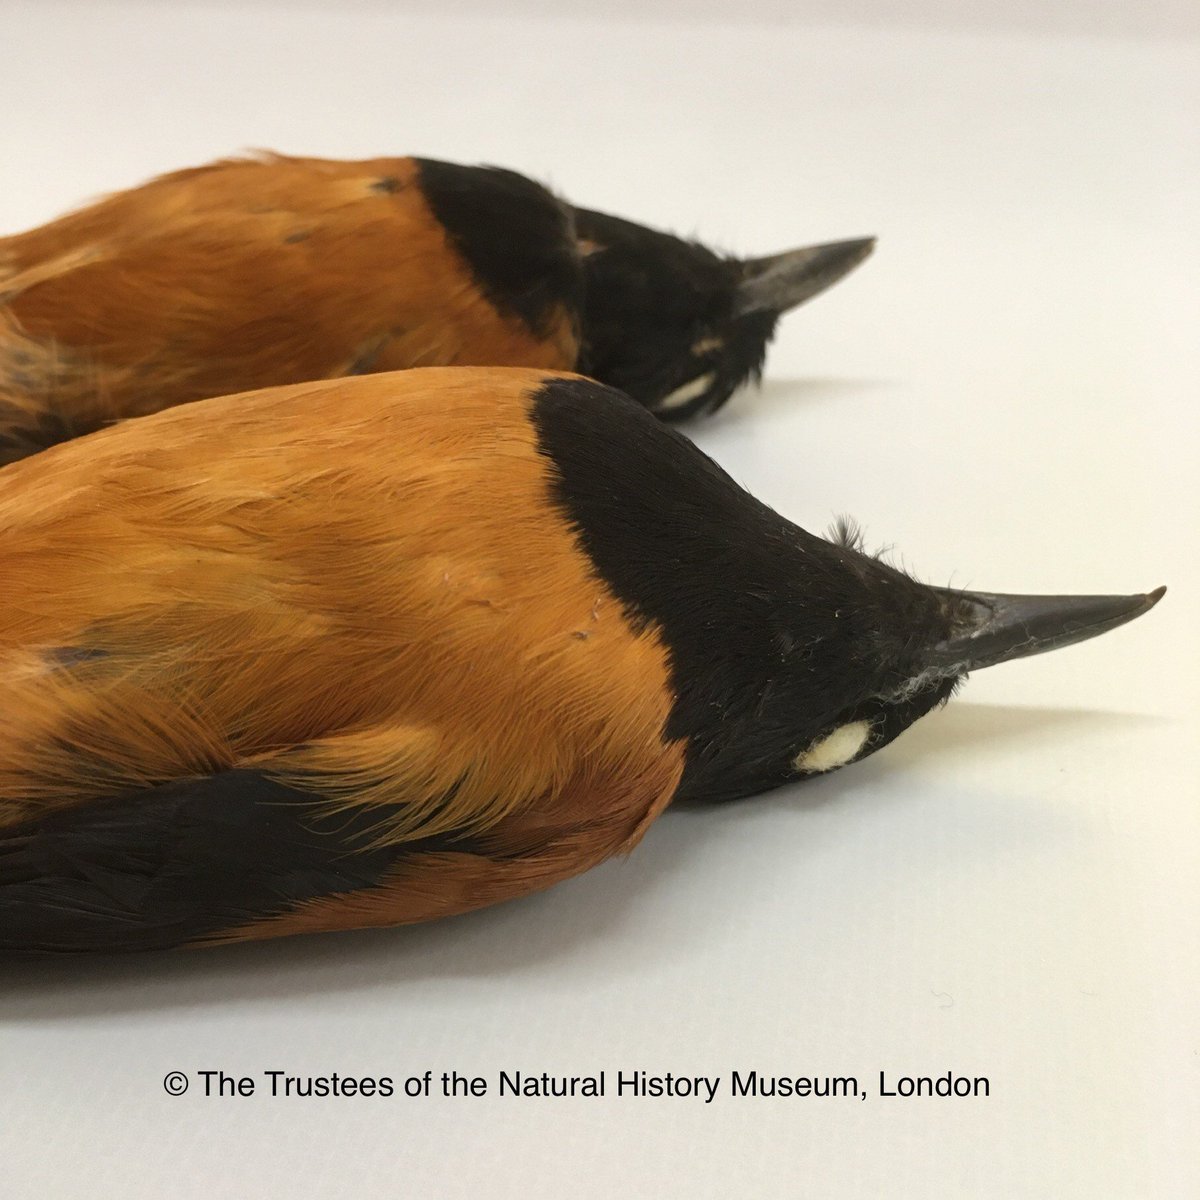 Is this eggshell toxic?! An egg of the most poisonous bird in the world - Hooded Pitohui are one of several species which use toxins usually found in poison arrow frogs. Their skin & breast feathers are covered in batrachotoxins so it is likely some is transferred to their eggs!